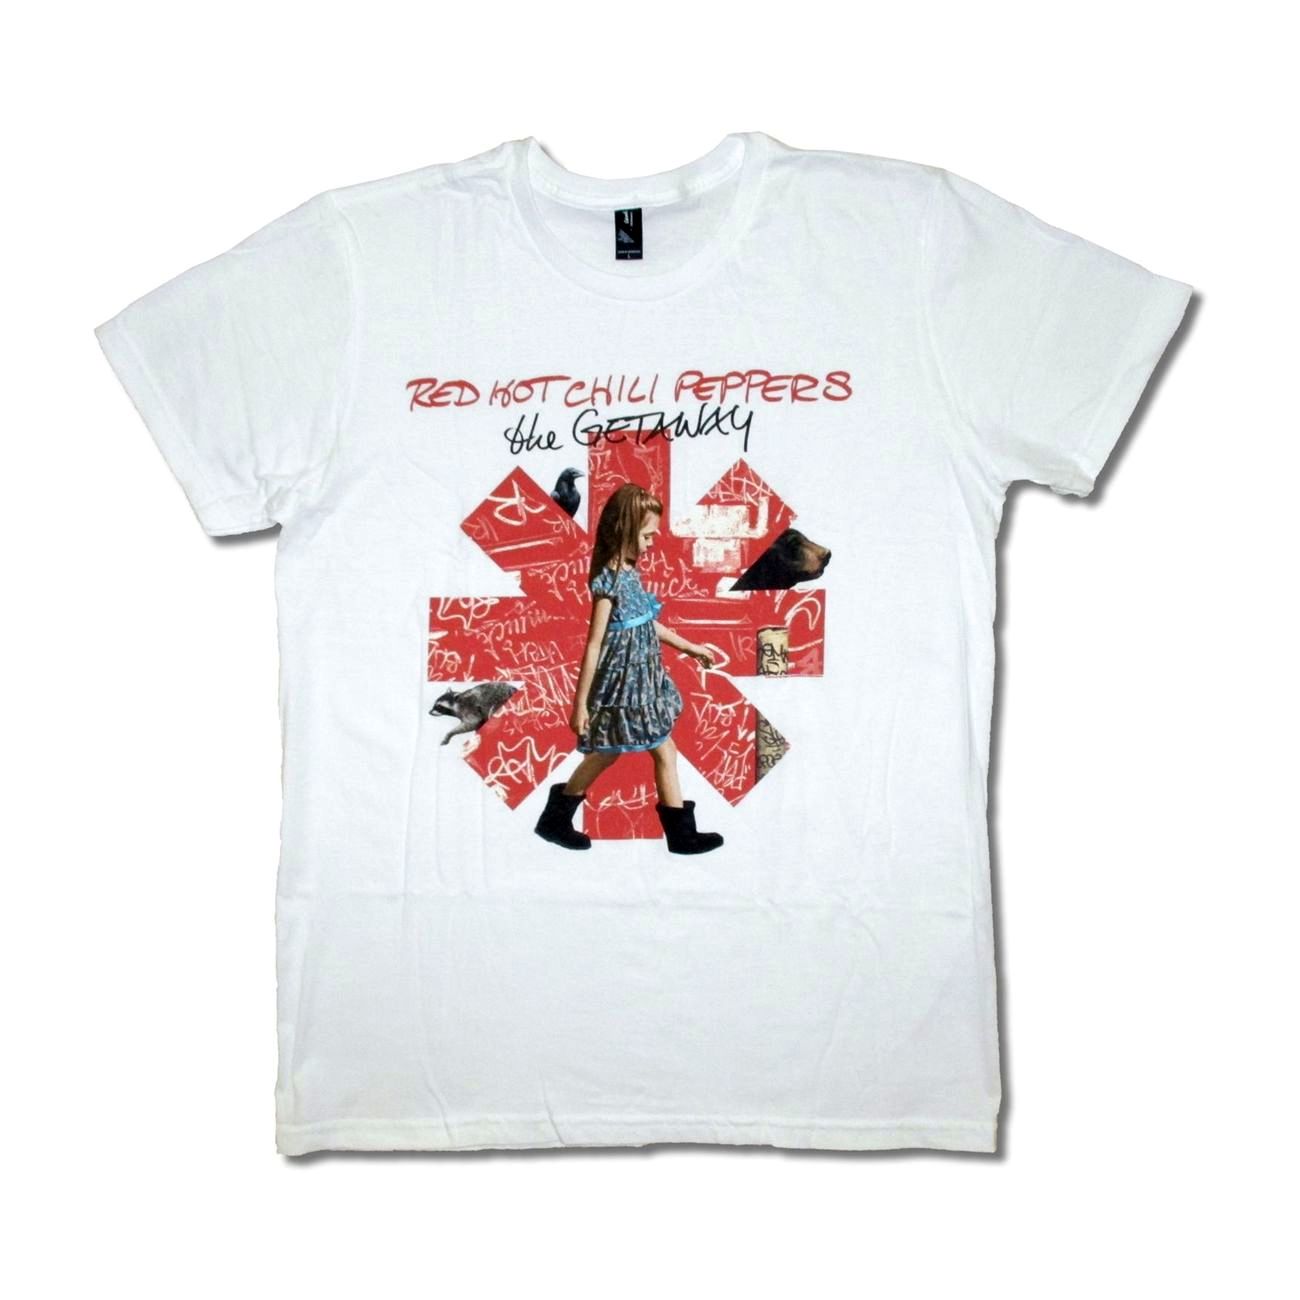 RED HOT CHILI PEPPERS レッチリ バンド Tシャツ XL